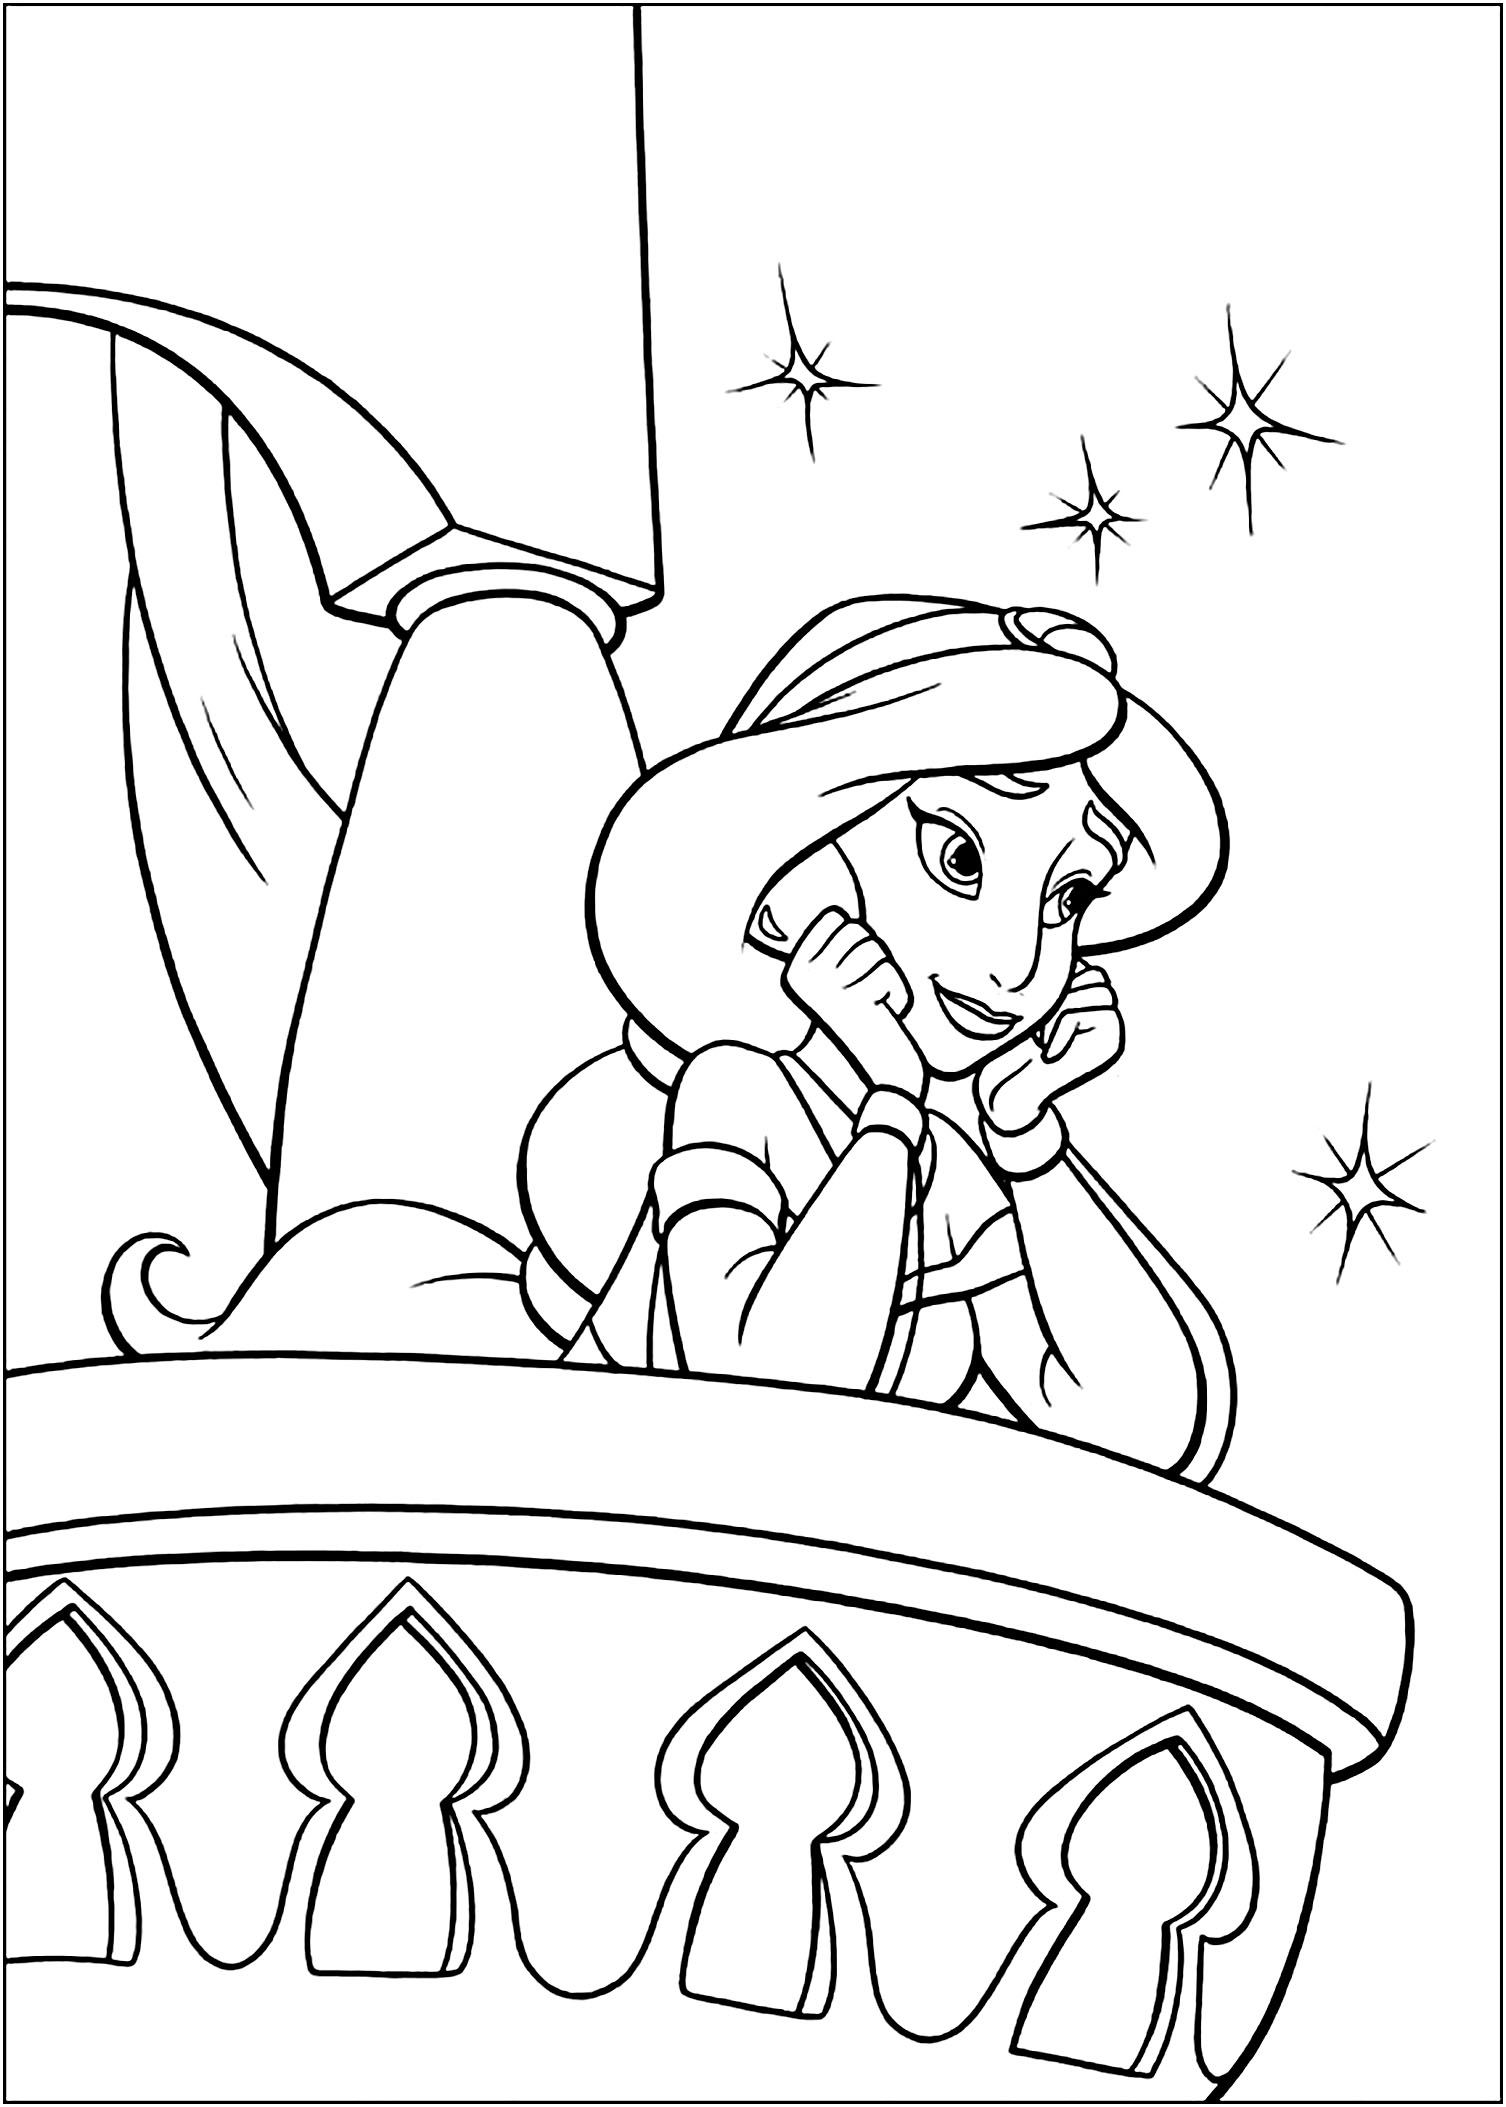 Jasmine Is Thinking Coloring Pages   Coloring Cool